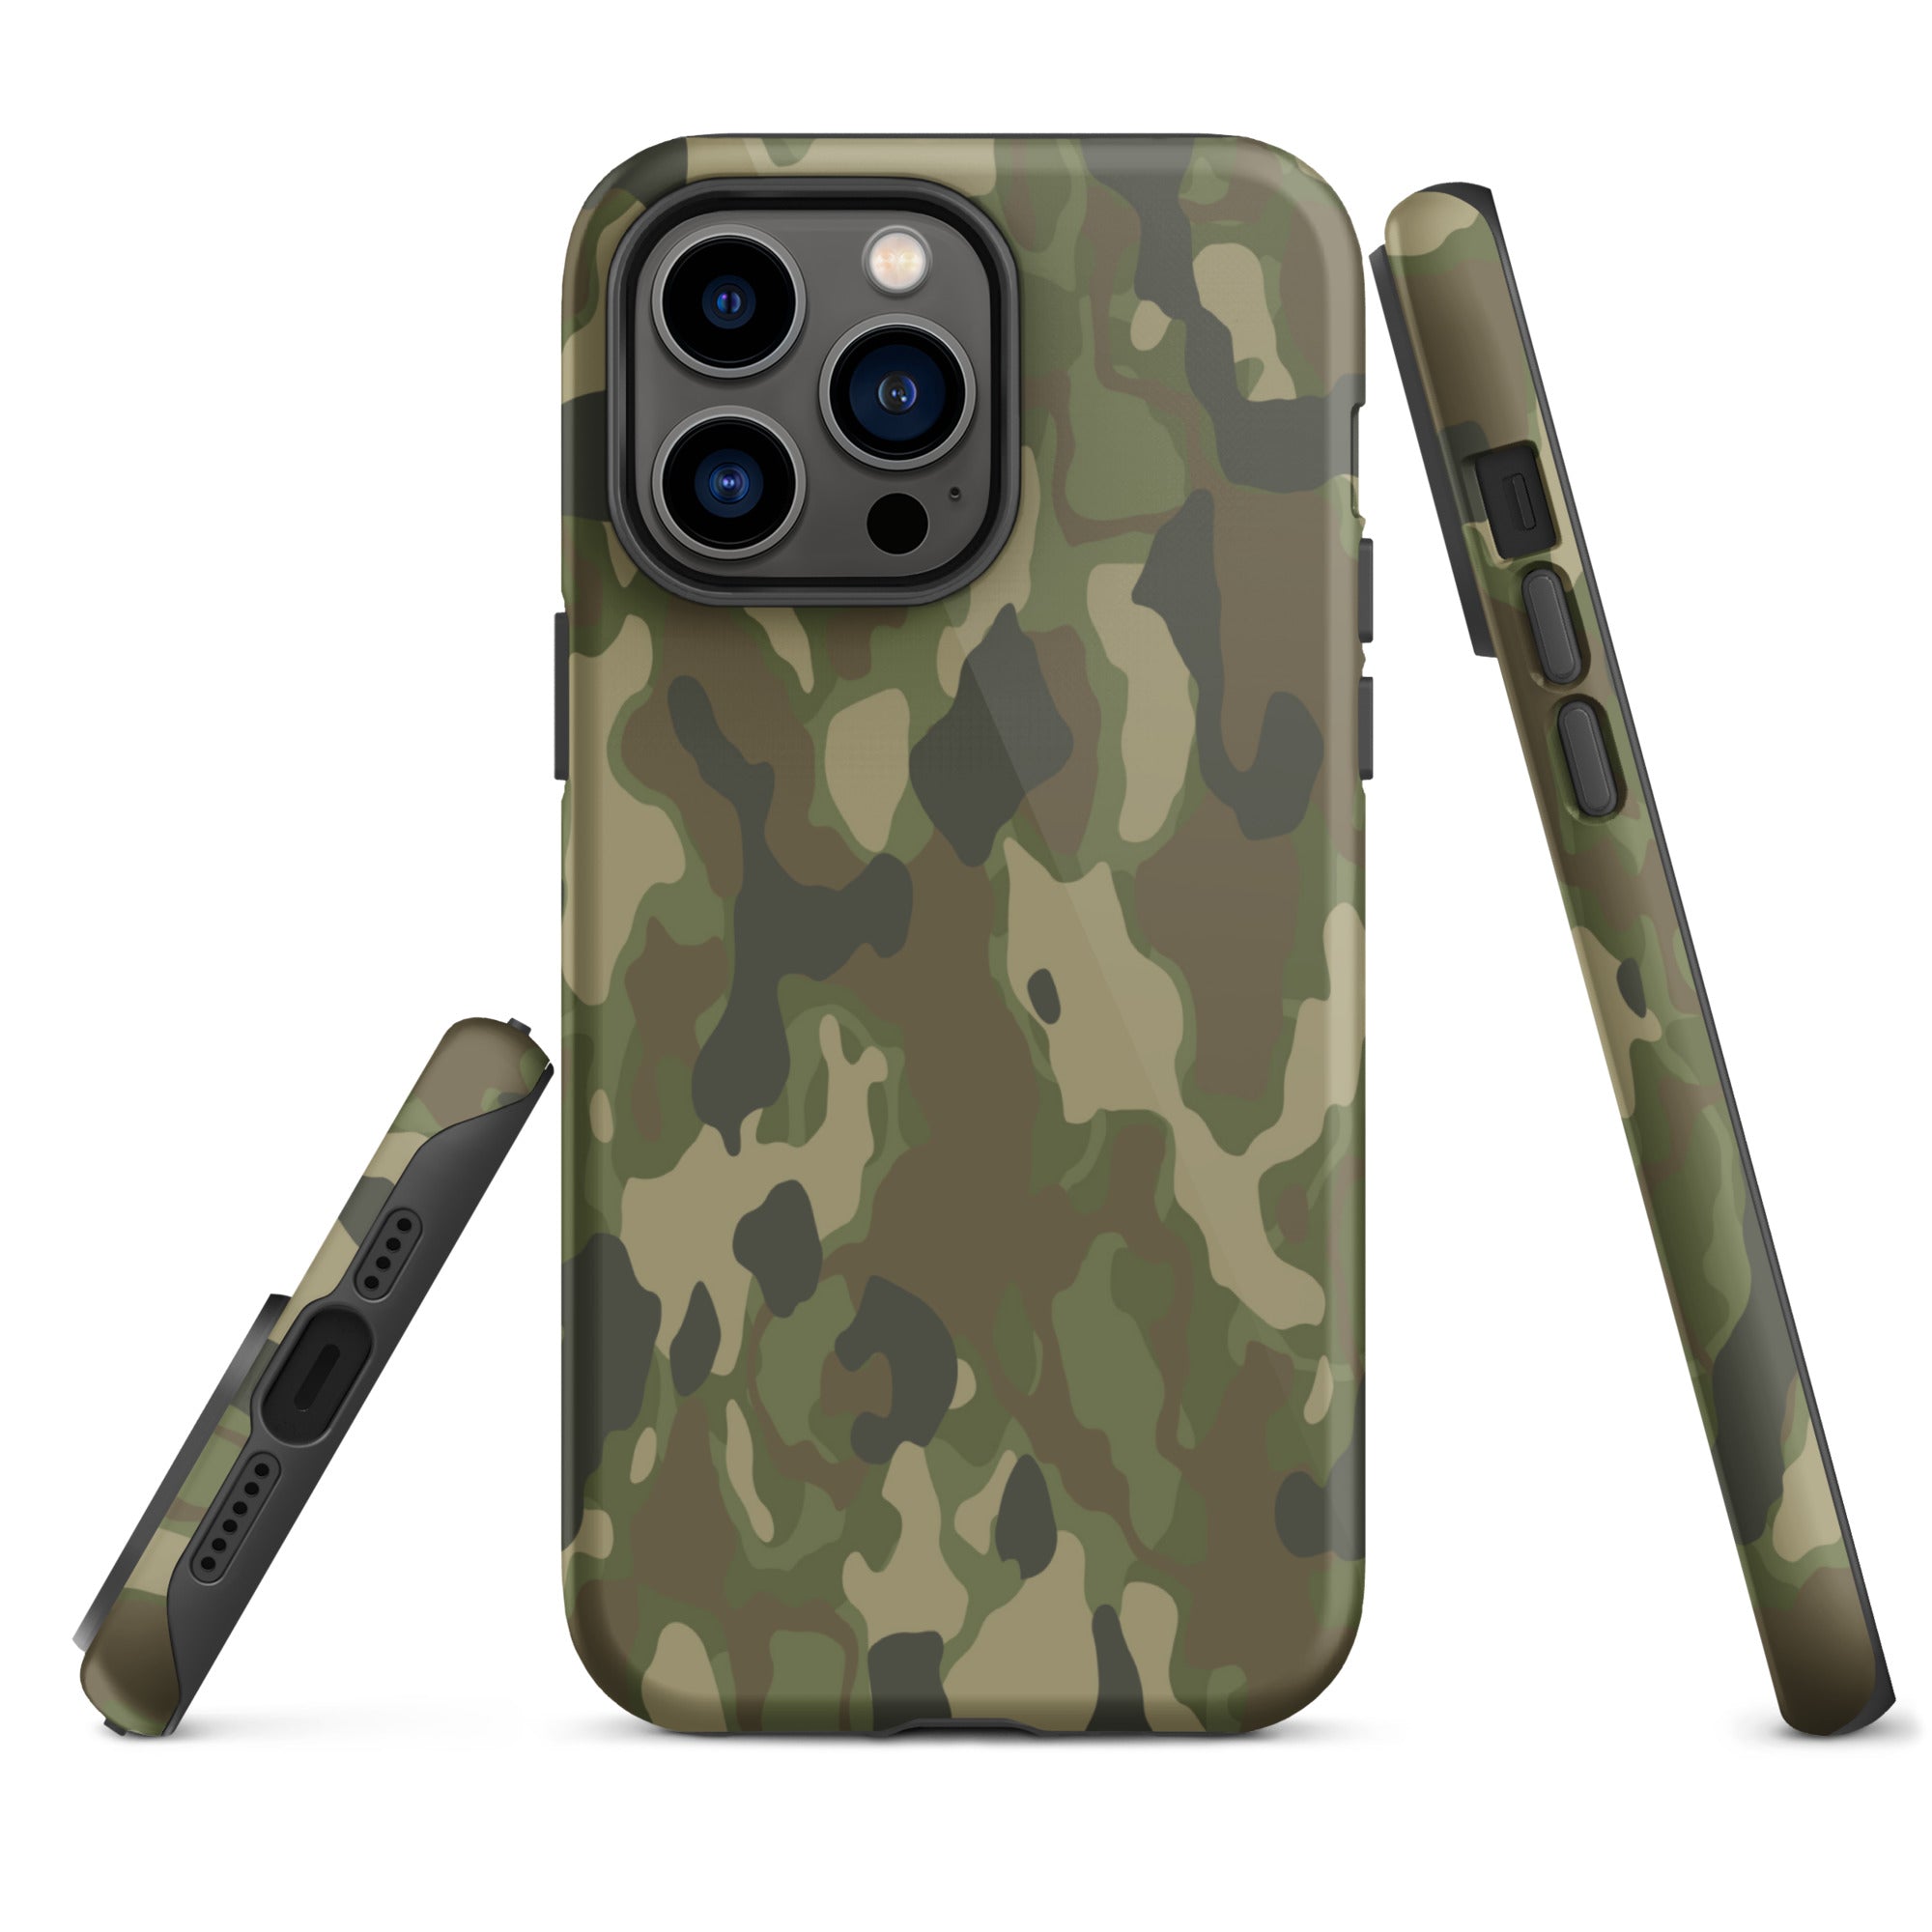 Coque d'iPhone® rigide -  from chtmboutique by chtmboutique - Coques et protections - Accessoires pour iPhone, iphone, camo, camouflage, militaire